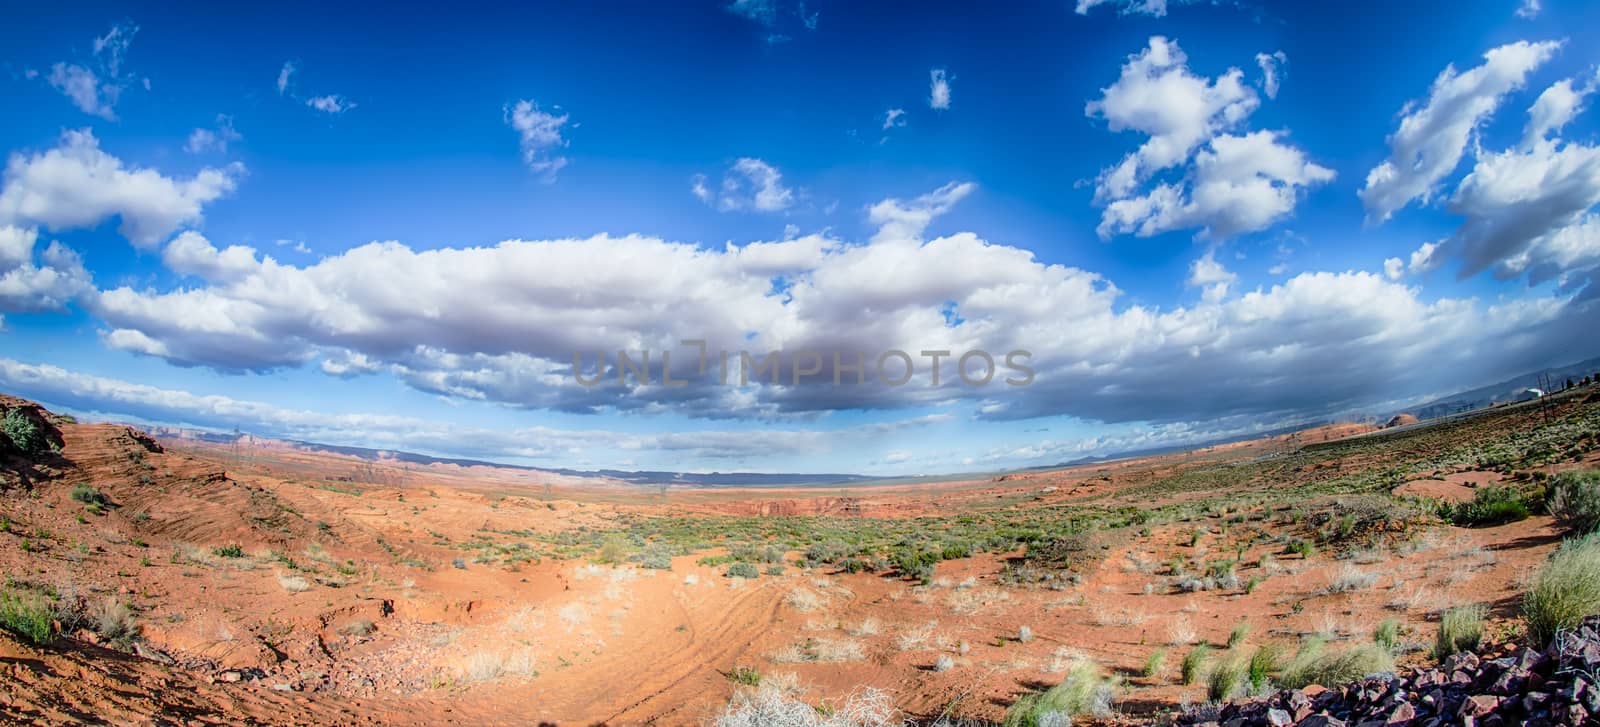 panorama of a valley in utah desert with blue sky by digidreamgrafix